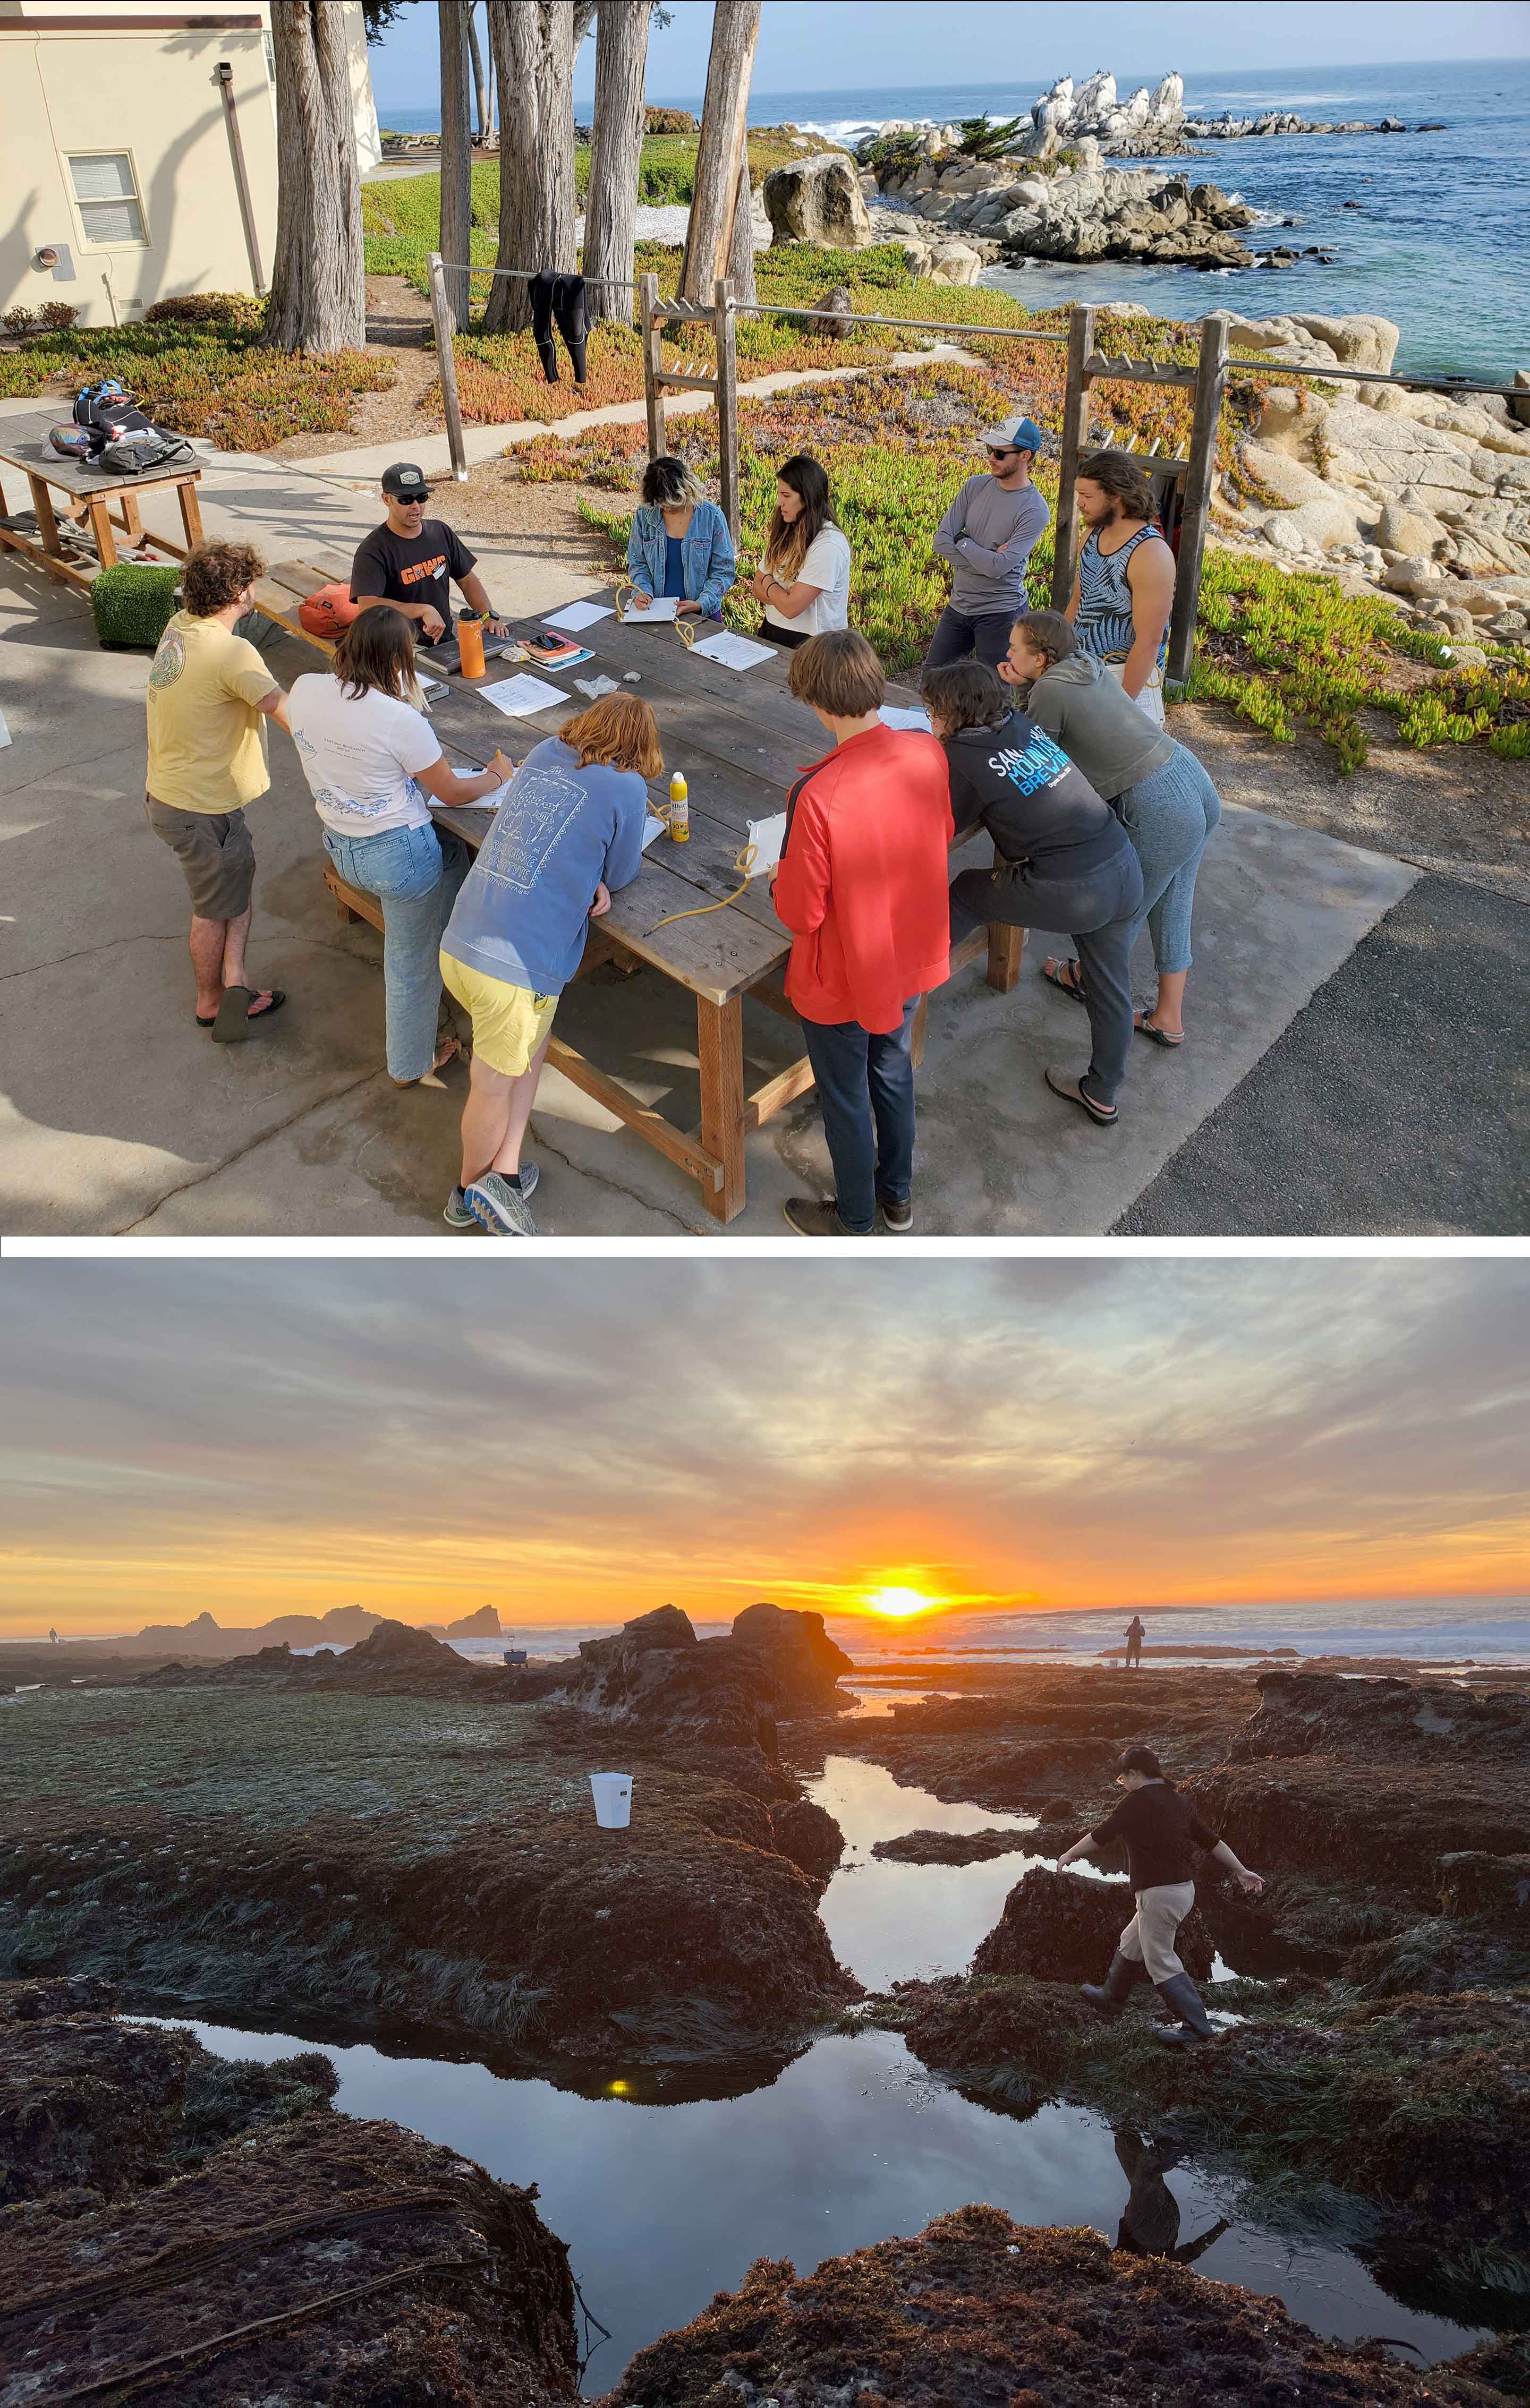 Two images: first a group of students looking at something on a table outside near the ocean. Next people gathering something at the beach at sunset